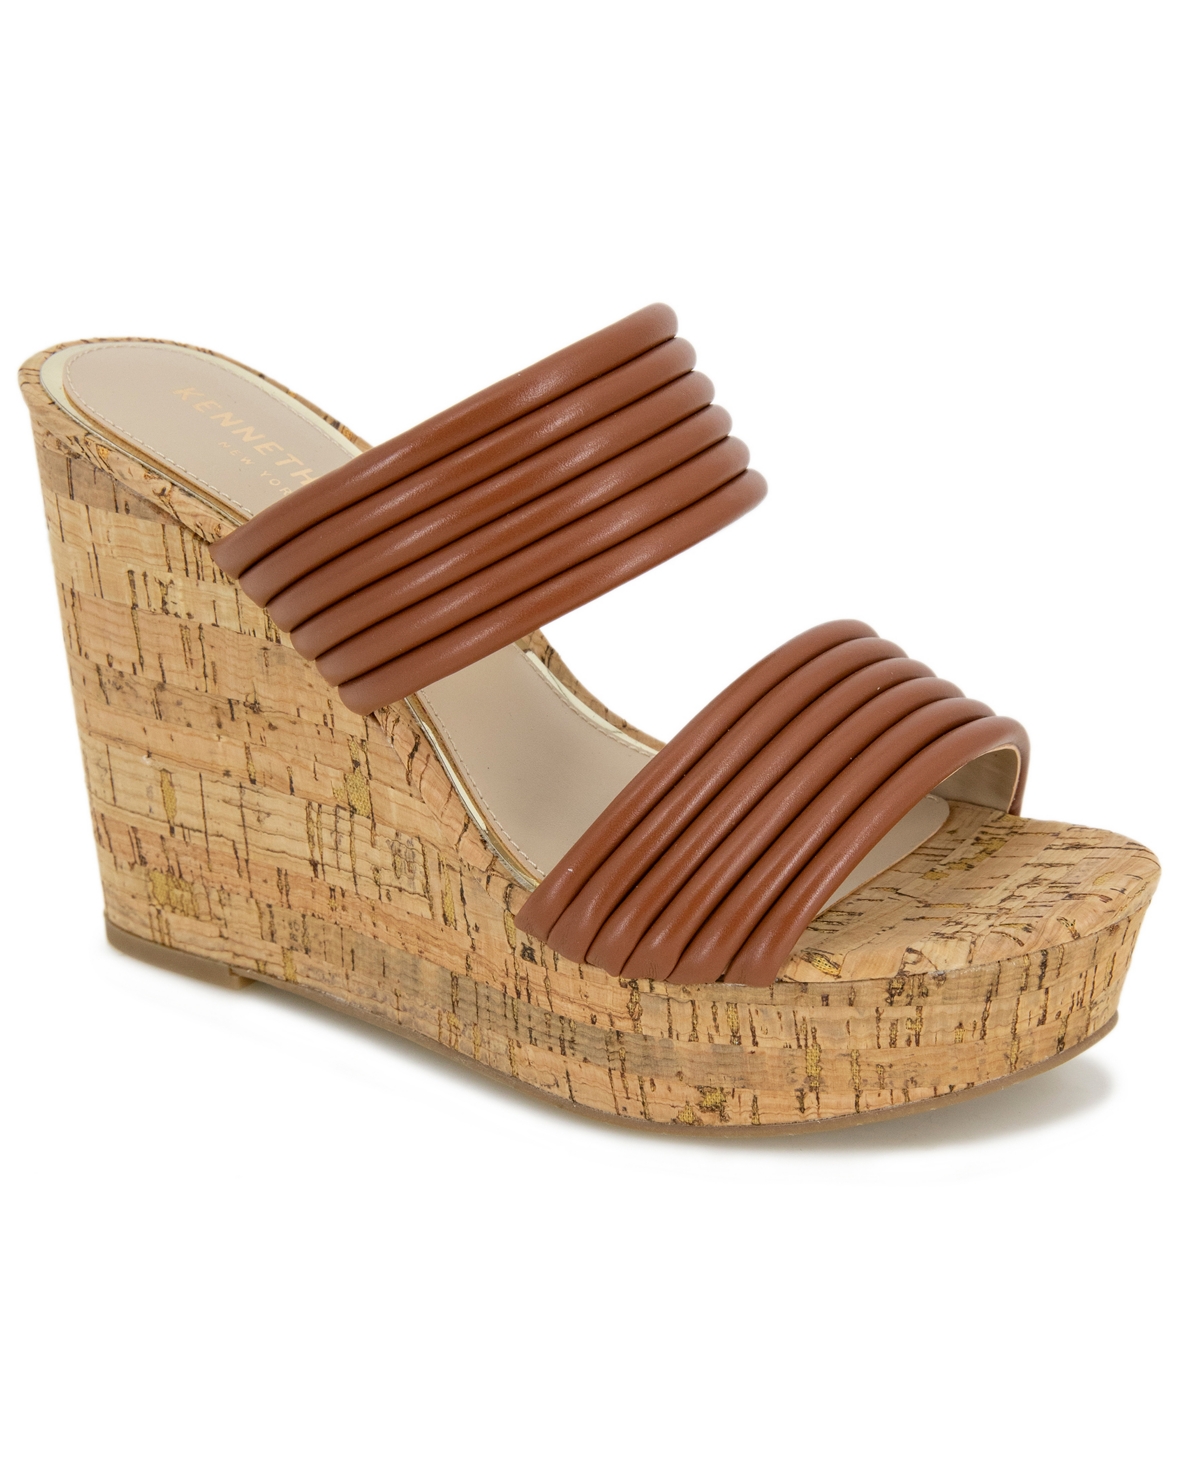 Kenneth Cole New York Women's Cailyn Wedge Sandals Women's Shoes